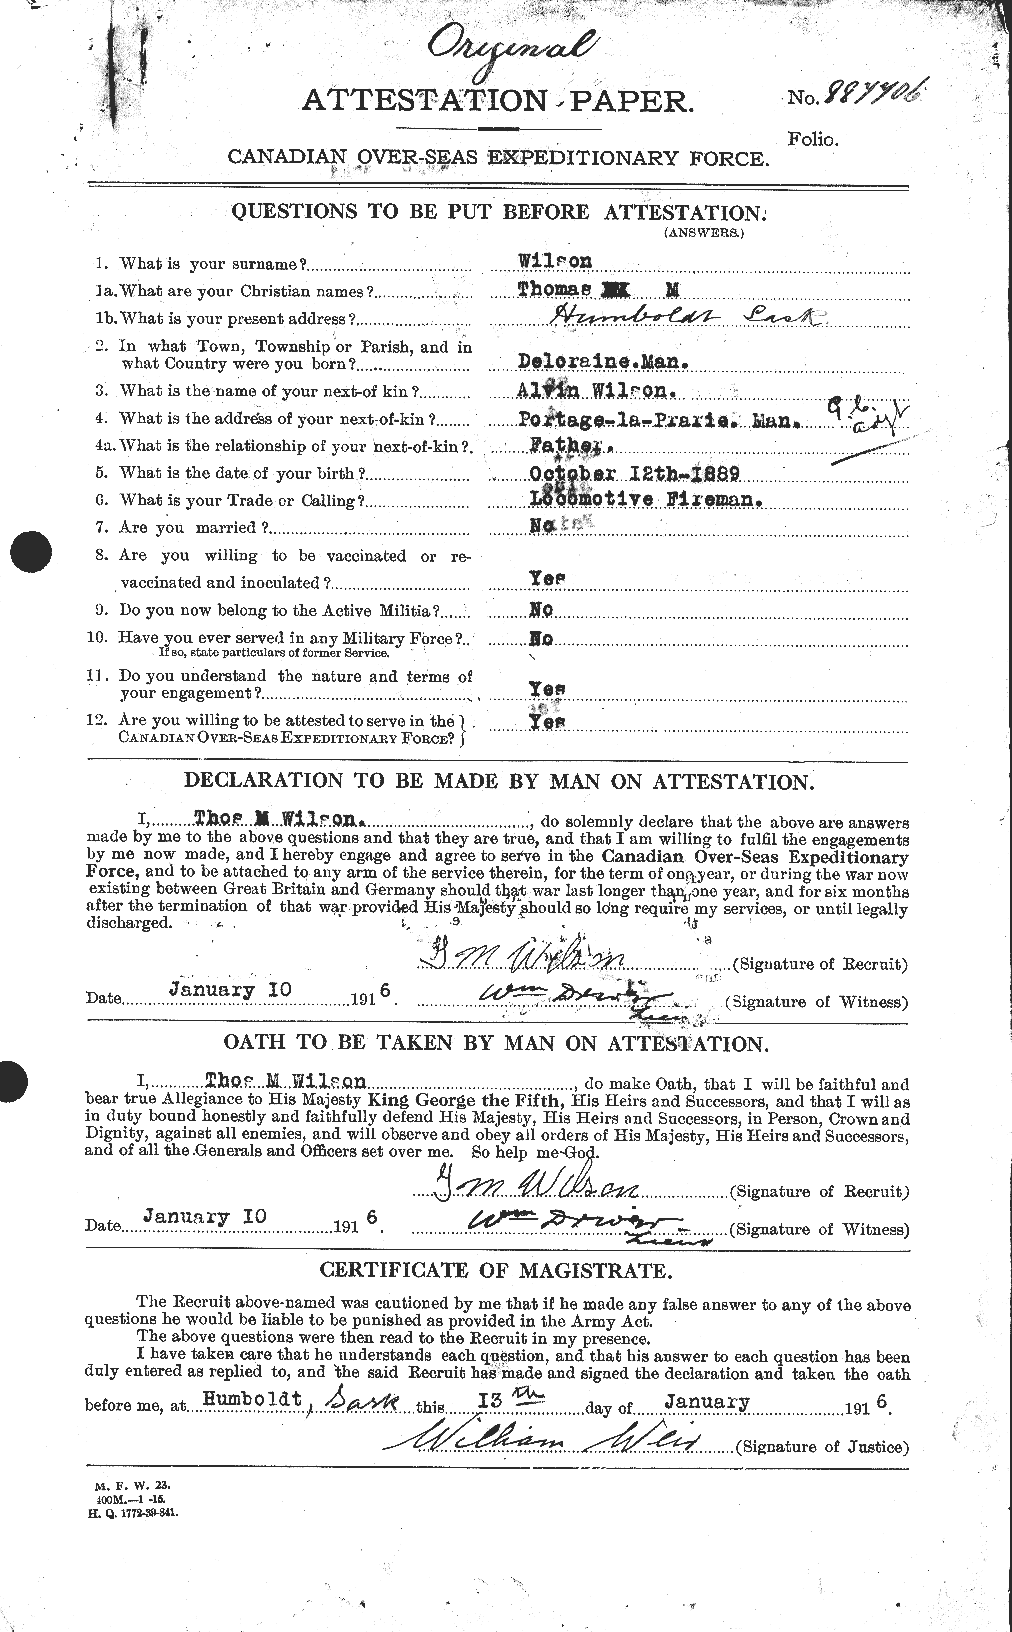 Personnel Records of the First World War - CEF 681286a